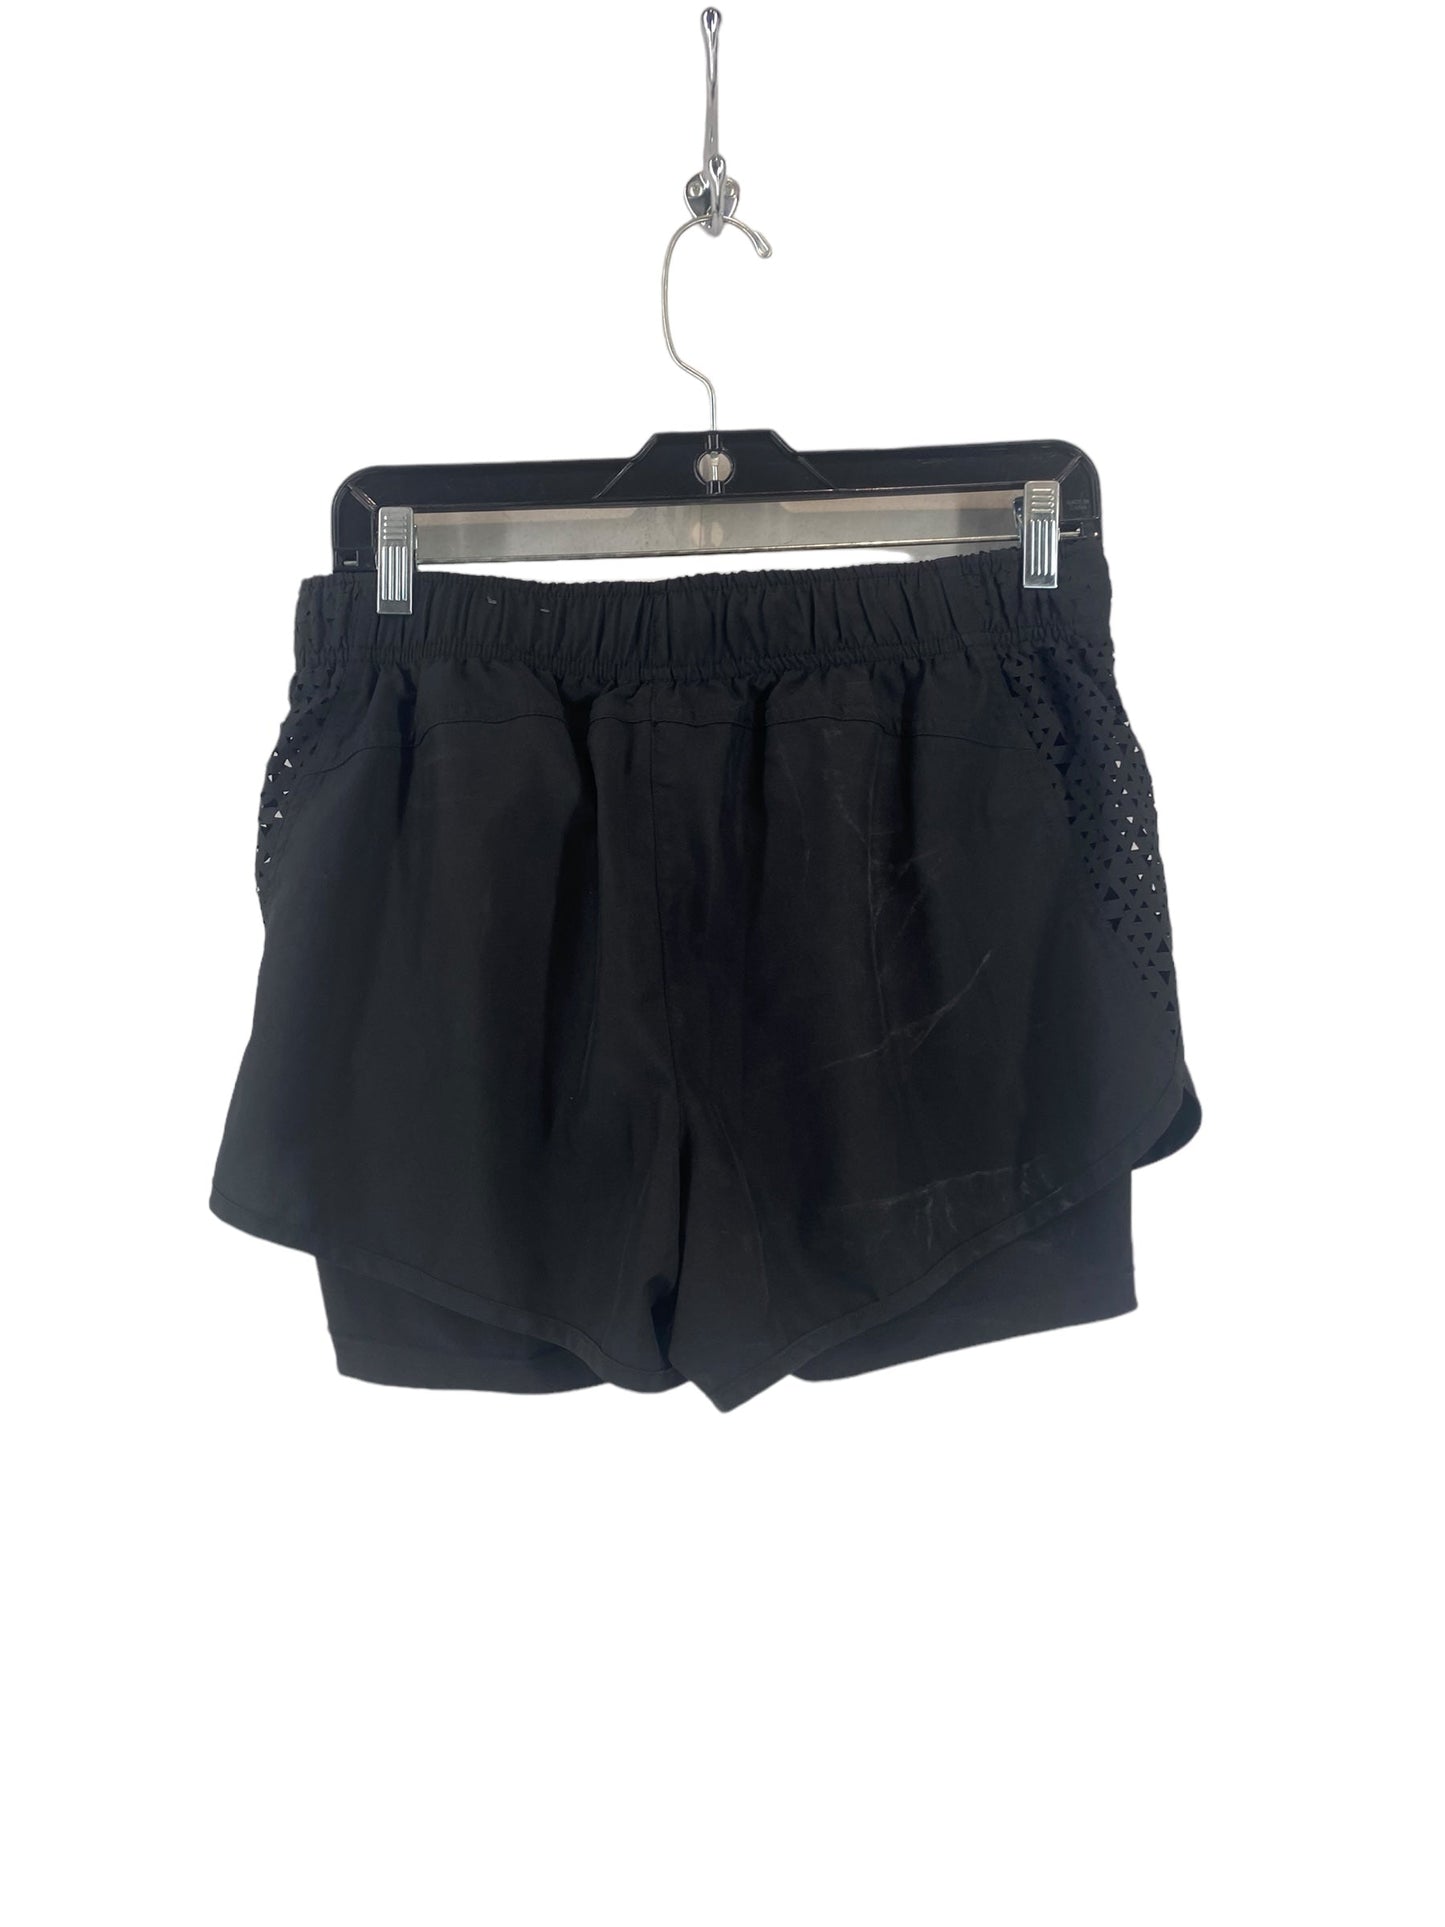 Shorts By Xersion  Size: M